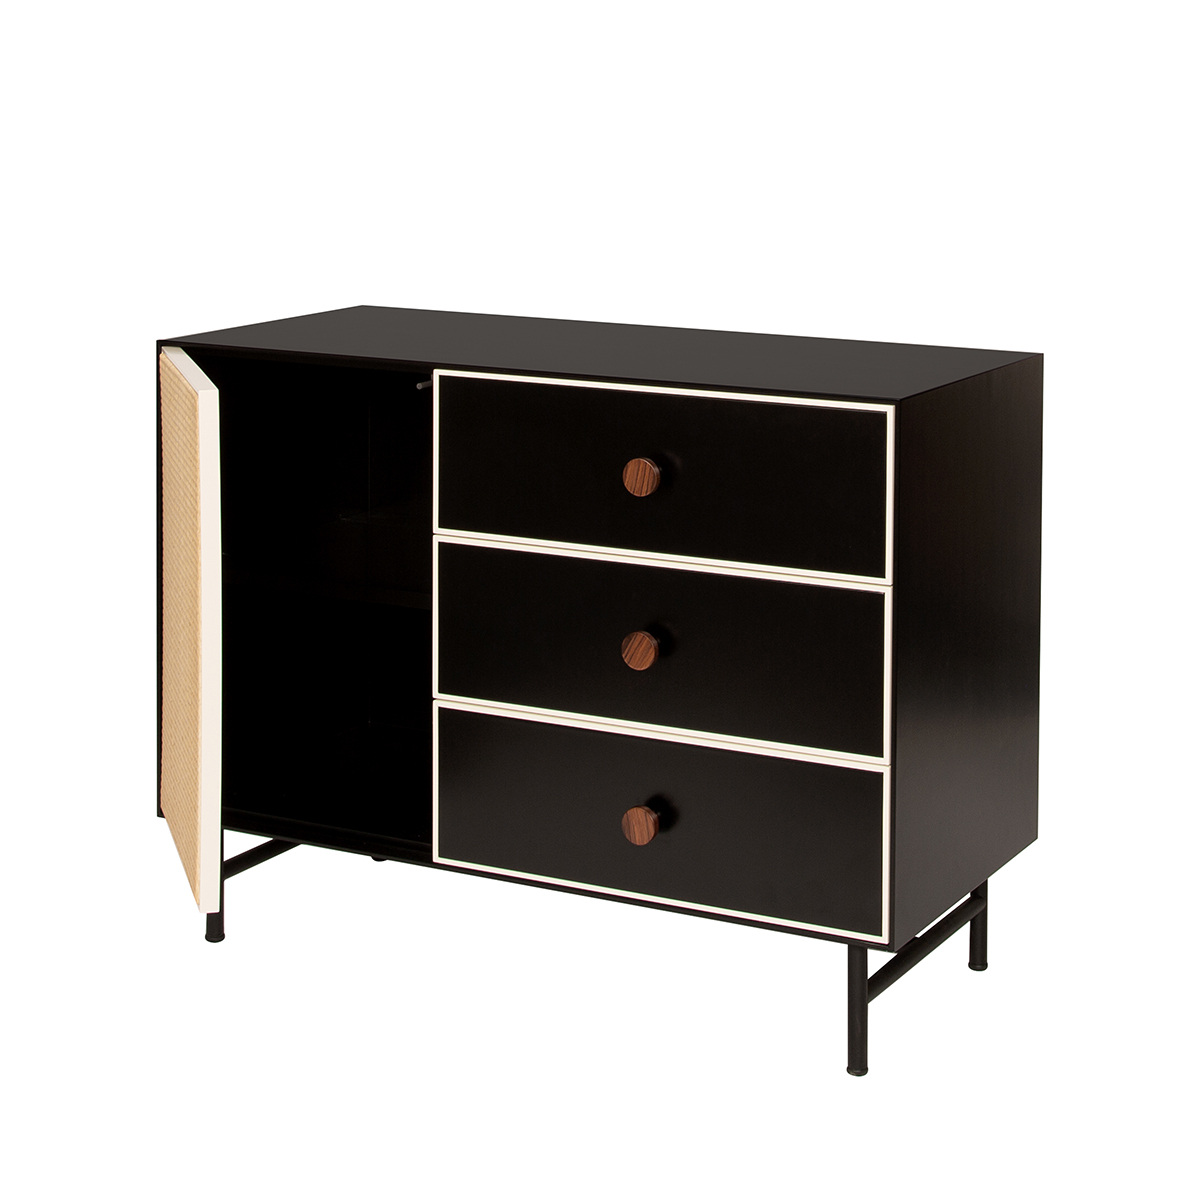 Chest of Drawers Essence, Green / Black - L100 x W45 x H75 cm - Lacquered wood - image 10